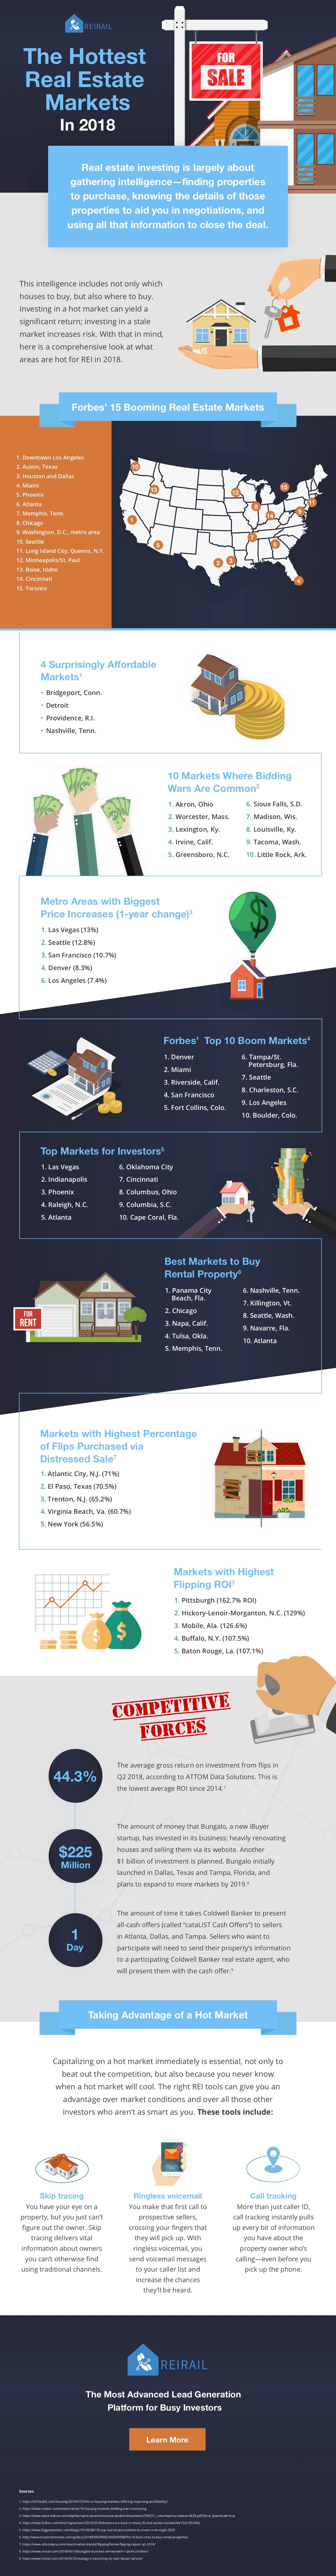 Infographic - Hottest Real Estate Markets in 2018